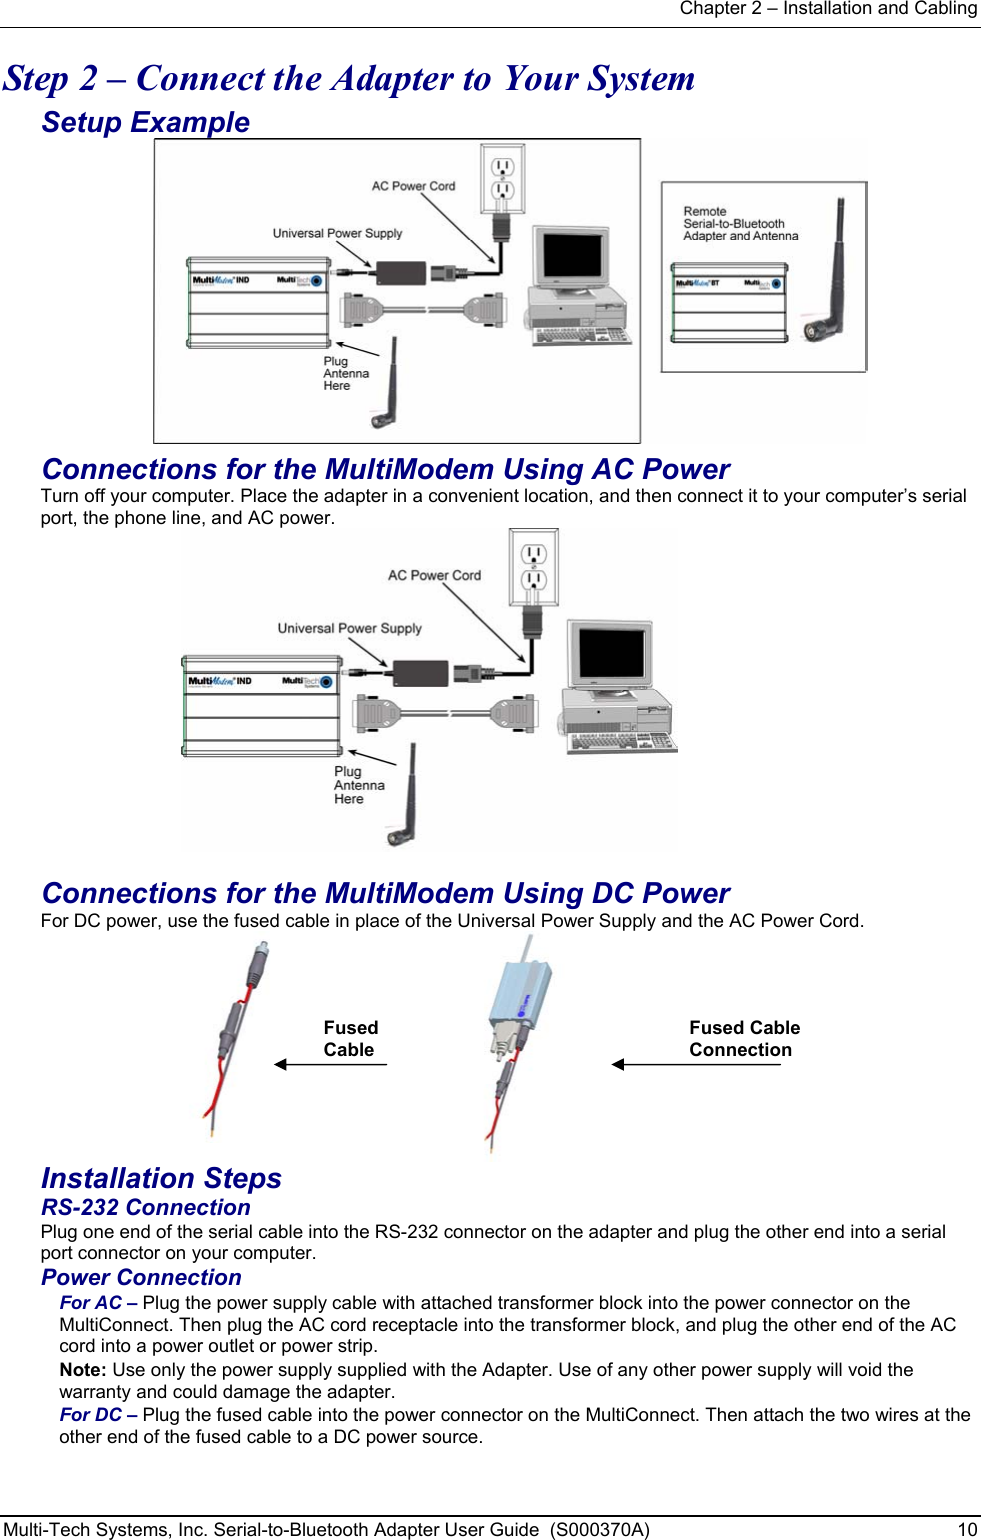 Chapter 2 – Installation and Cabling Multi-Tech Systems, Inc. Serial-to-Bluetooth Adapter User Guide  (S000370A)  10  Step 2 – Connect the Adapter to Your System Setup Example  Connections for the MultiModem Using AC Power Turn off your computer. Place the adapter in a convenient location, and then connect it to your computer’s serial port, the phone line, and AC power.   Connections for the MultiModem Using DC Power For DC power, use the fused cable in place of the Universal Power Supply and the AC Power Cord.       Fused  Cable      Fused Cable Connection Installation Steps  RS-232 Connection Plug one end of the serial cable into the RS-232 connector on the adapter and plug the other end into a serial port connector on your computer. Power Connection For AC – Plug the power supply cable with attached transformer block into the power connector on the MultiConnect. Then plug the AC cord receptacle into the transformer block, and plug the other end of the AC cord into a power outlet or power strip.    Note: Use only the power supply supplied with the Adapter. Use of any other power supply will void the warranty and could damage the adapter. For DC – Plug the fused cable into the power connector on the MultiConnect. Then attach the two wires at the other end of the fused cable to a DC power source.       